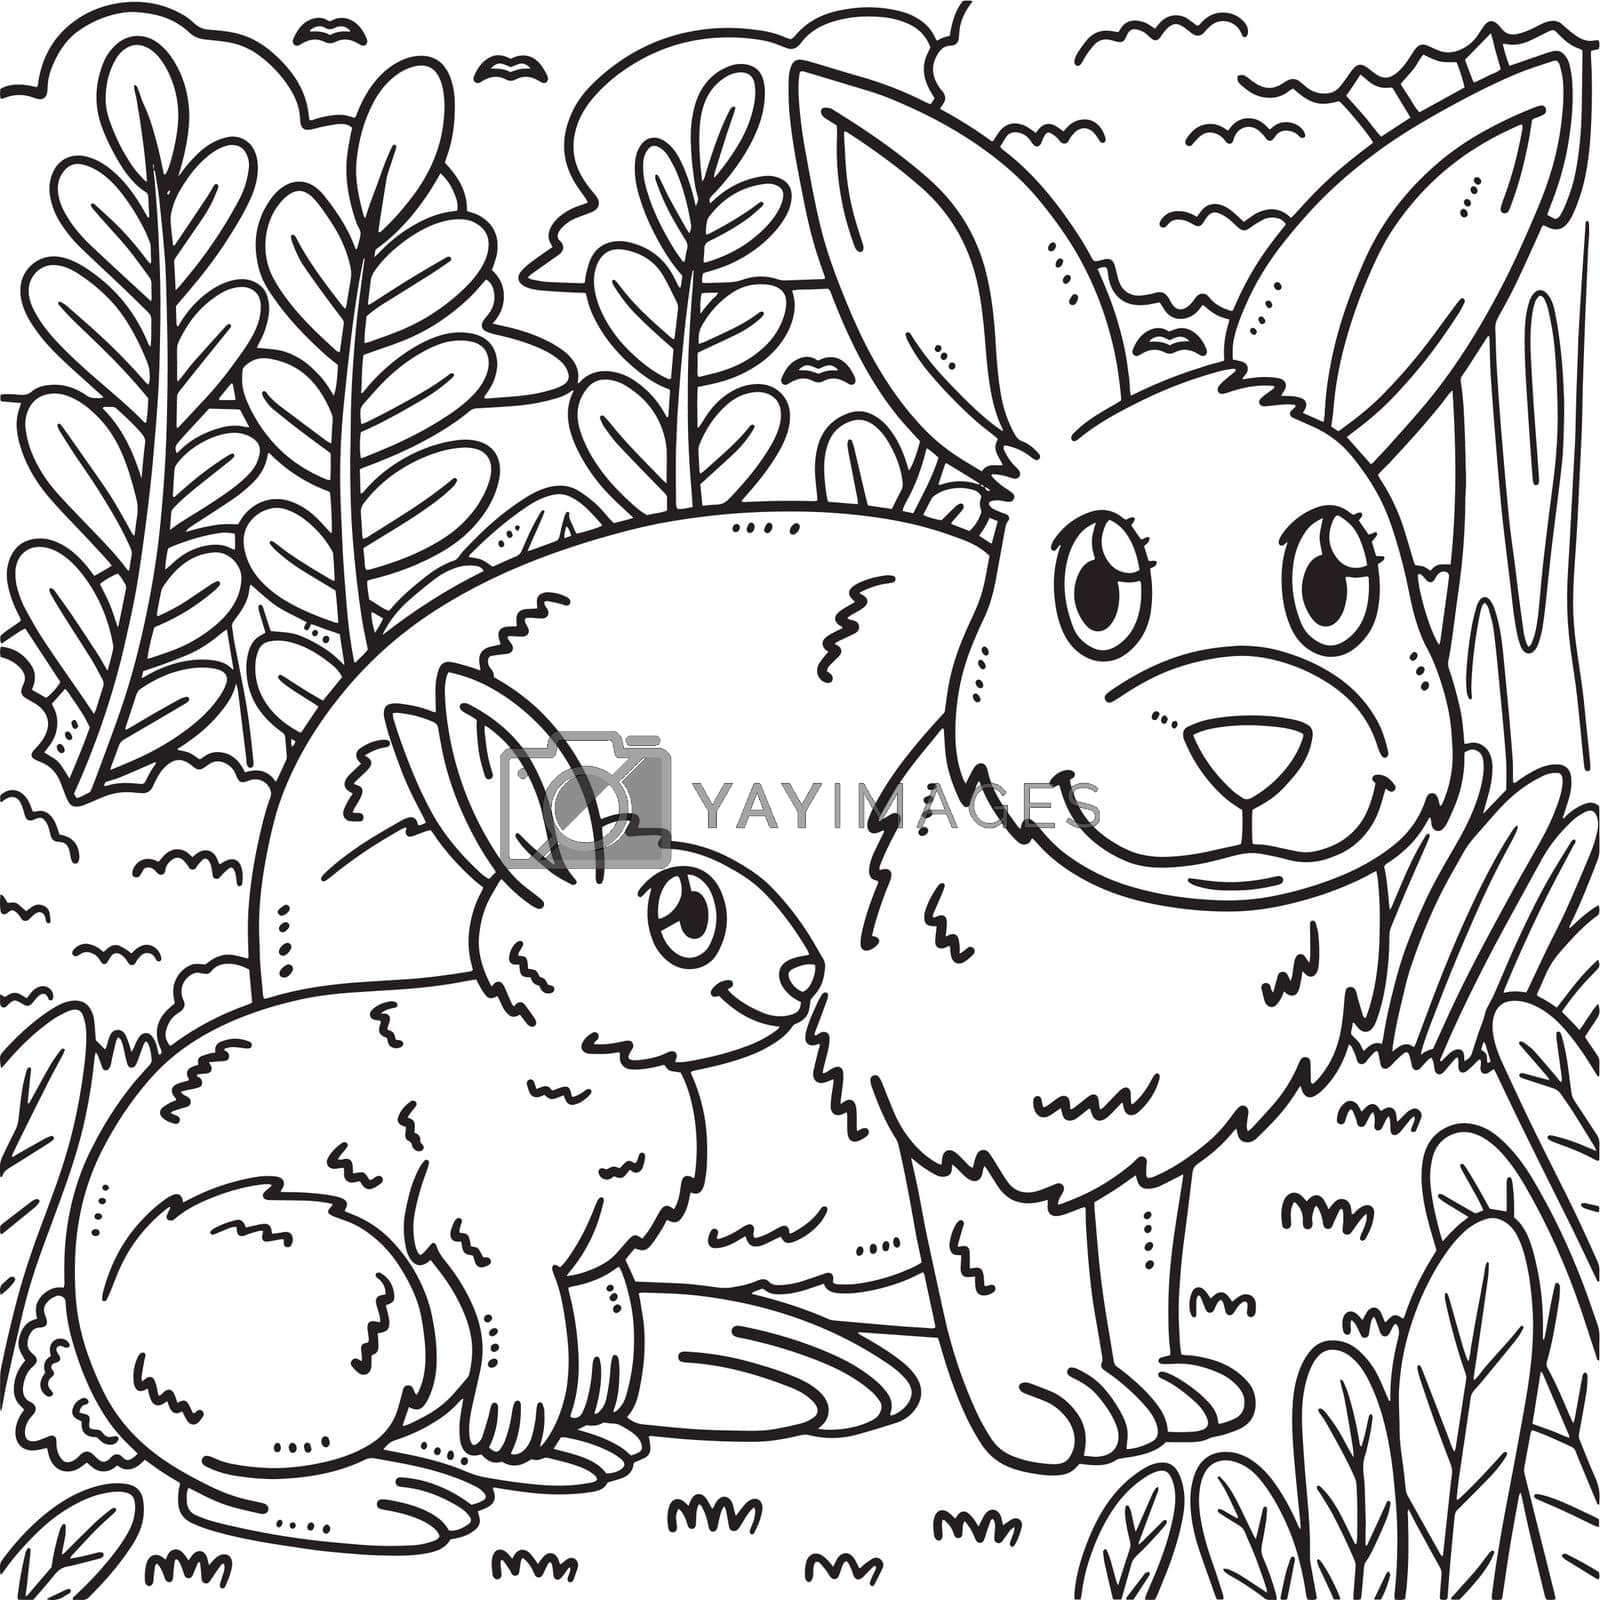 Royalty free image of Mother Rabbit and Baby Rabbit Coloring Page by abbydesign